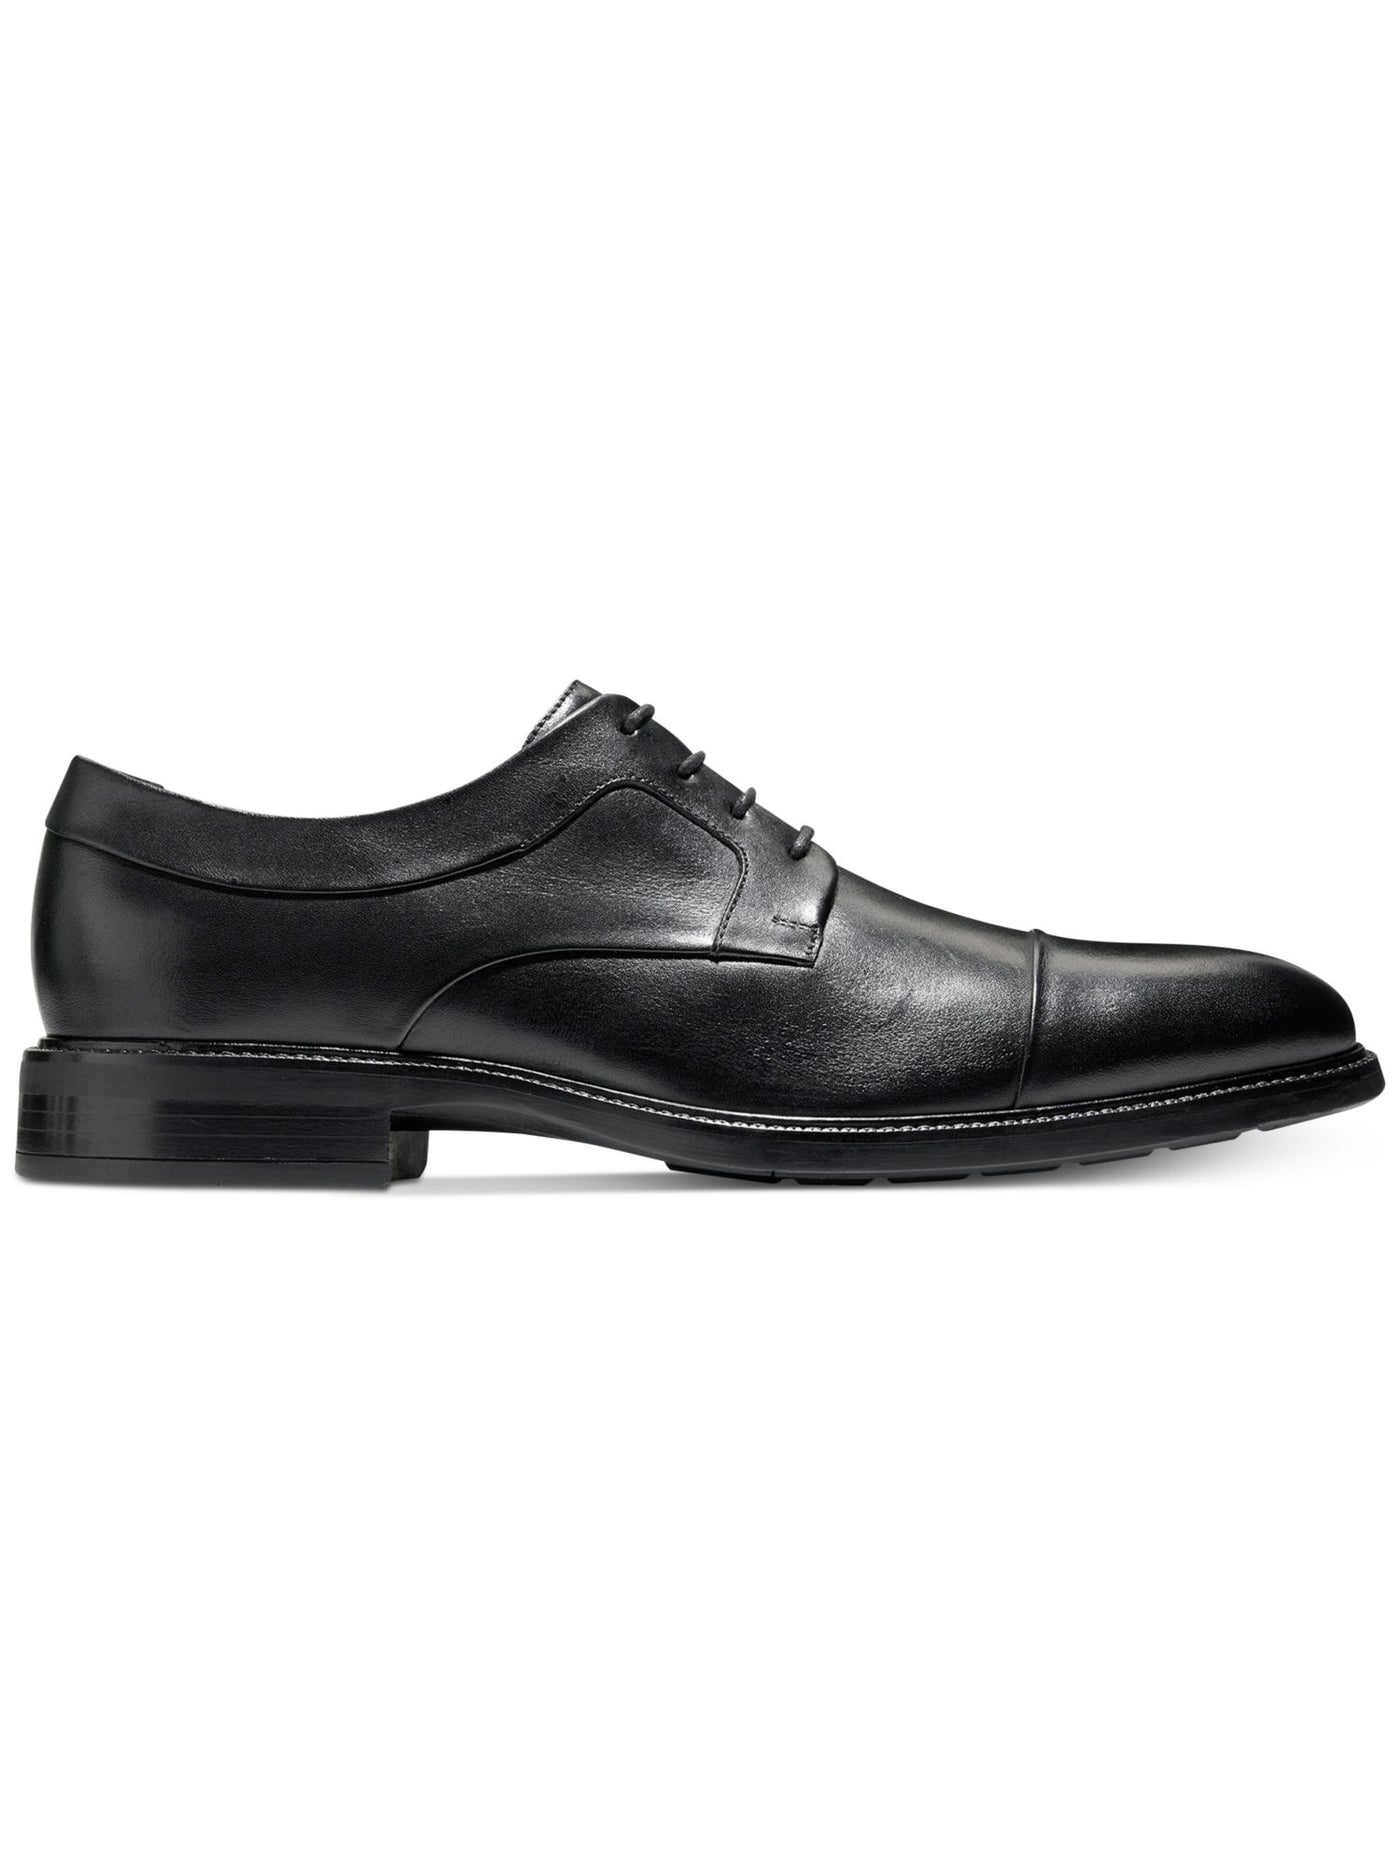 COLE HAAN Mens Black Padded Hartsfield Cap Toe Lace-Up Leather Dress Oxford Shoes 8.5 M